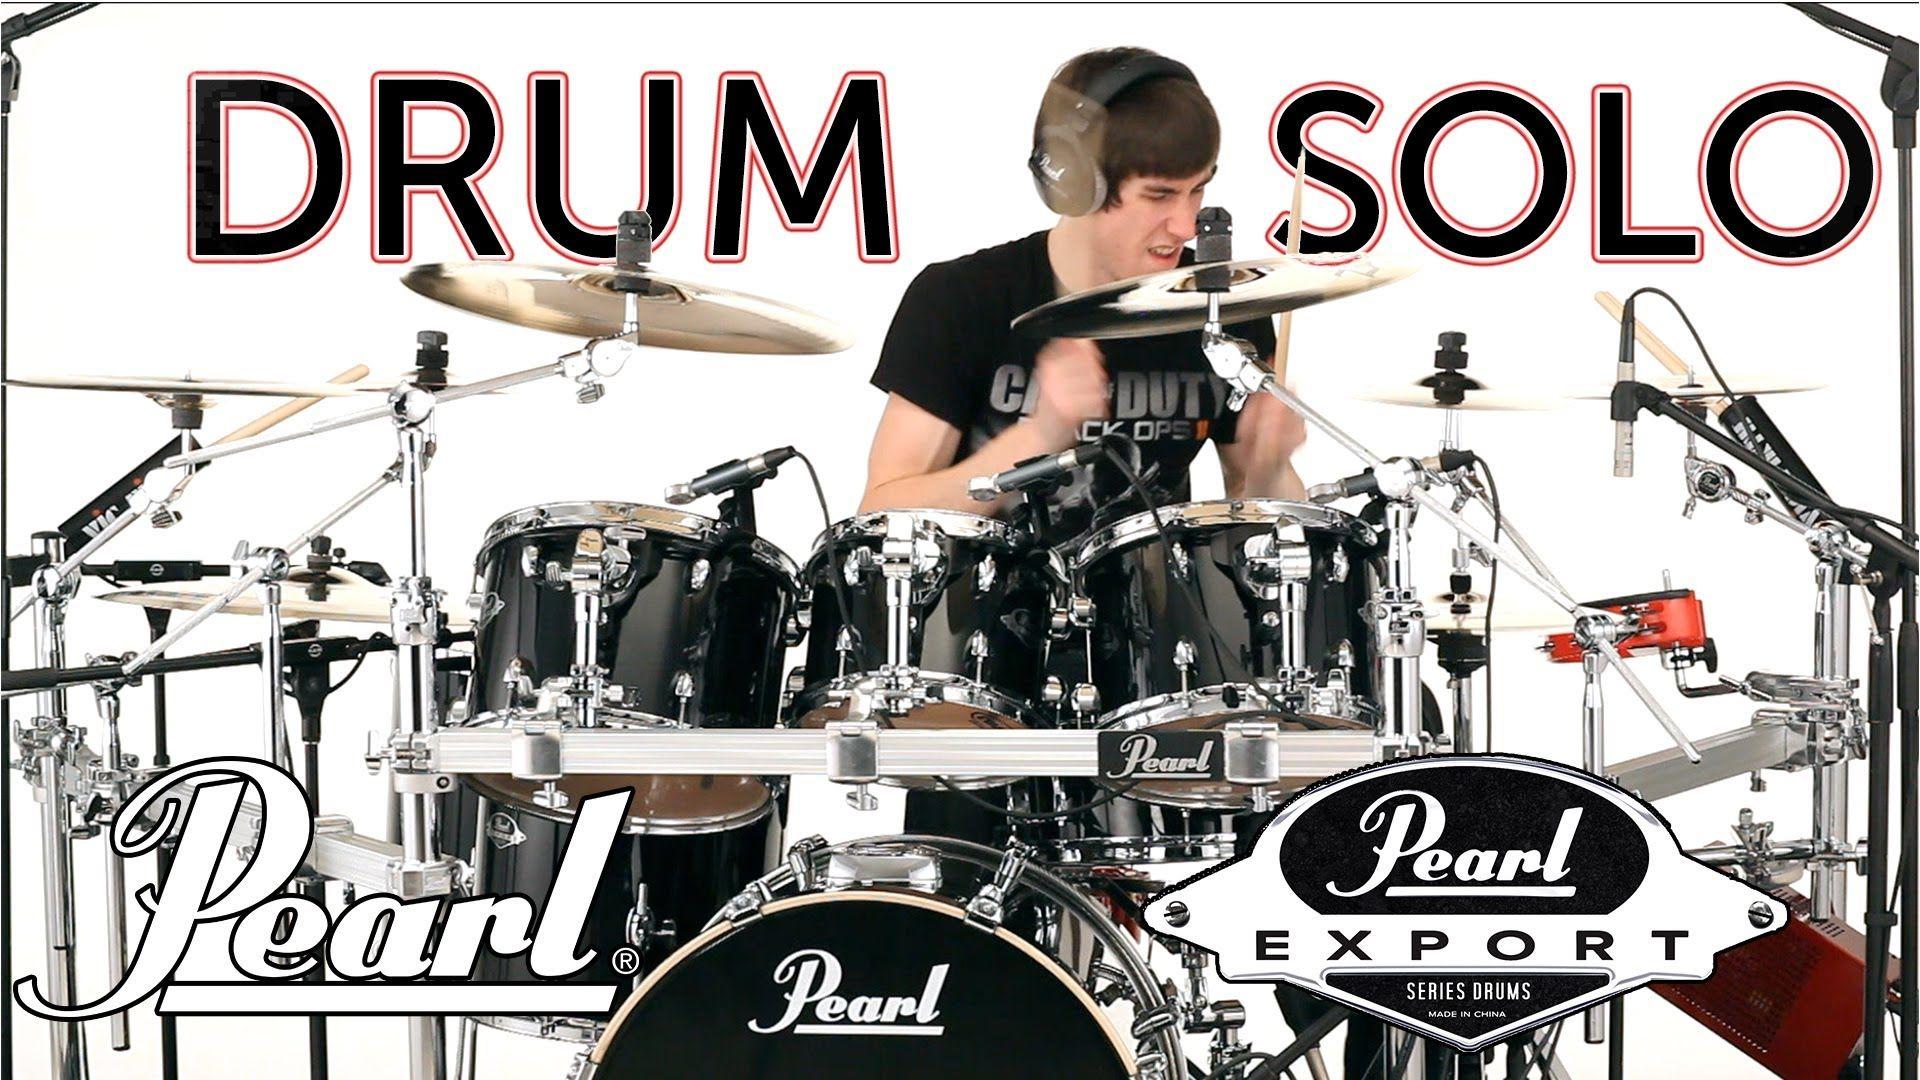 Drum Solos on the New Pearl Export Series Drums!